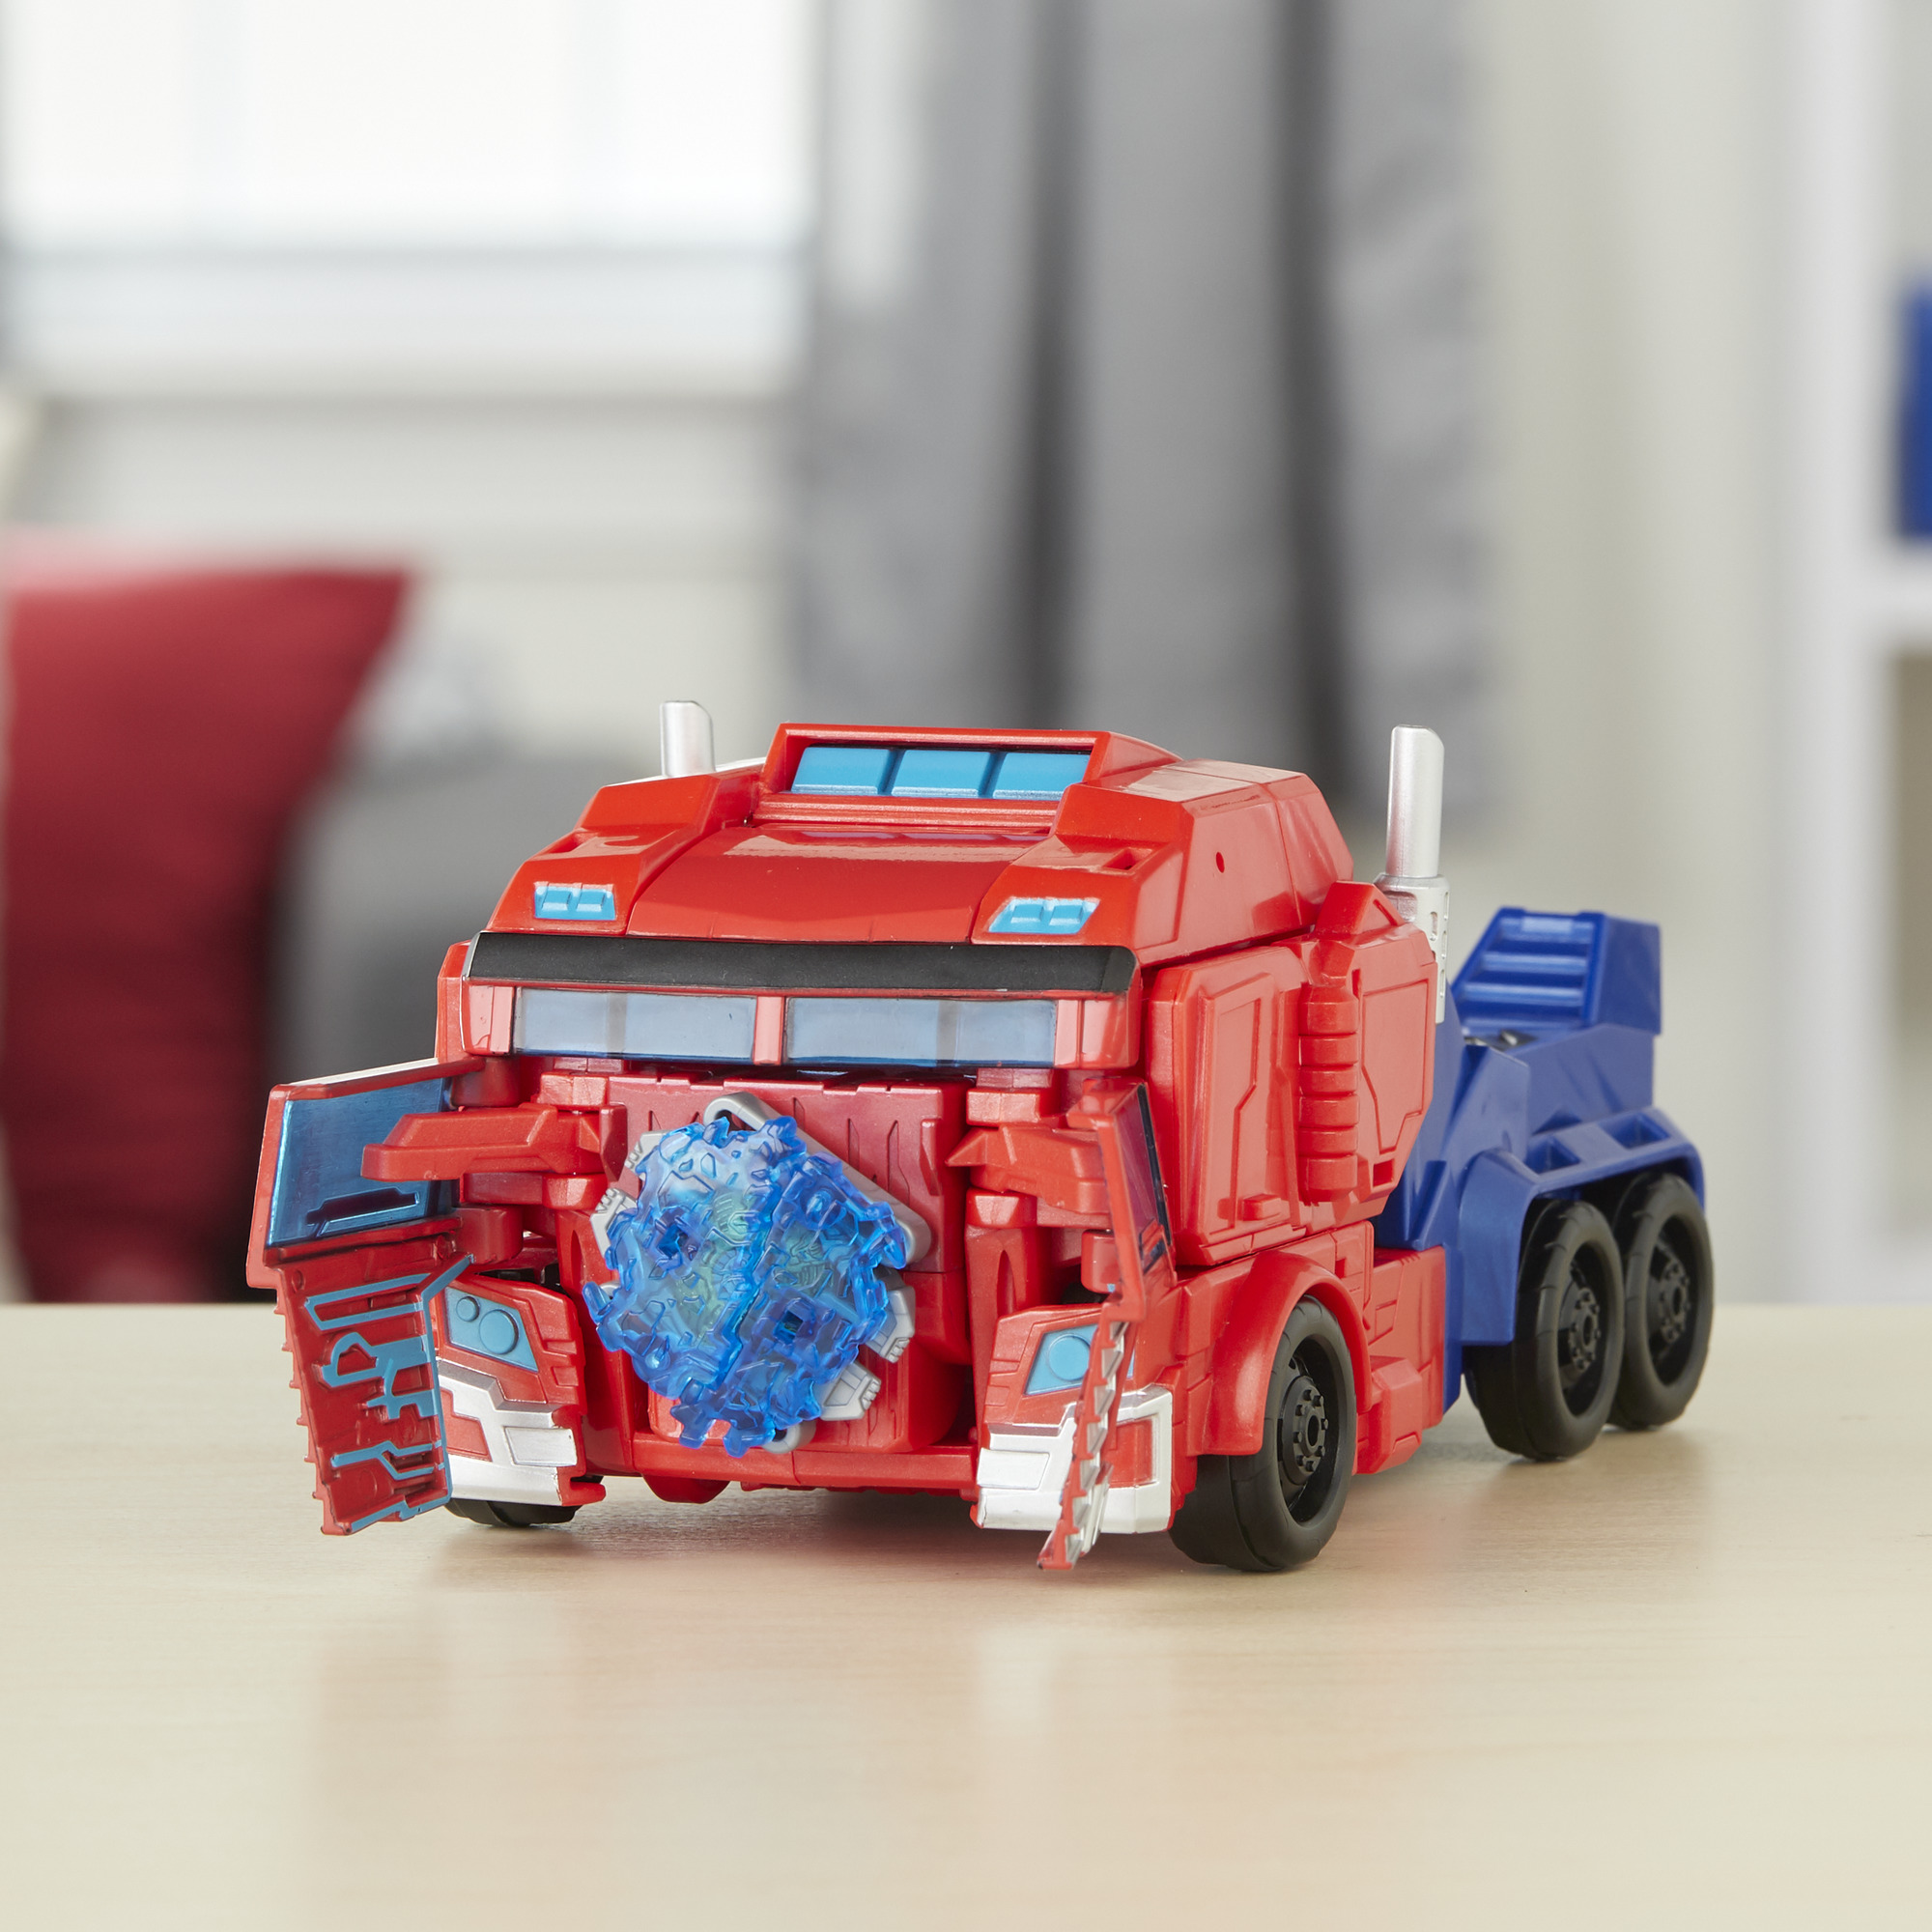 Transformers Cyberverse Ultimate Class Optimus Prime 11.5 Inch Action Figure - image 3 of 9